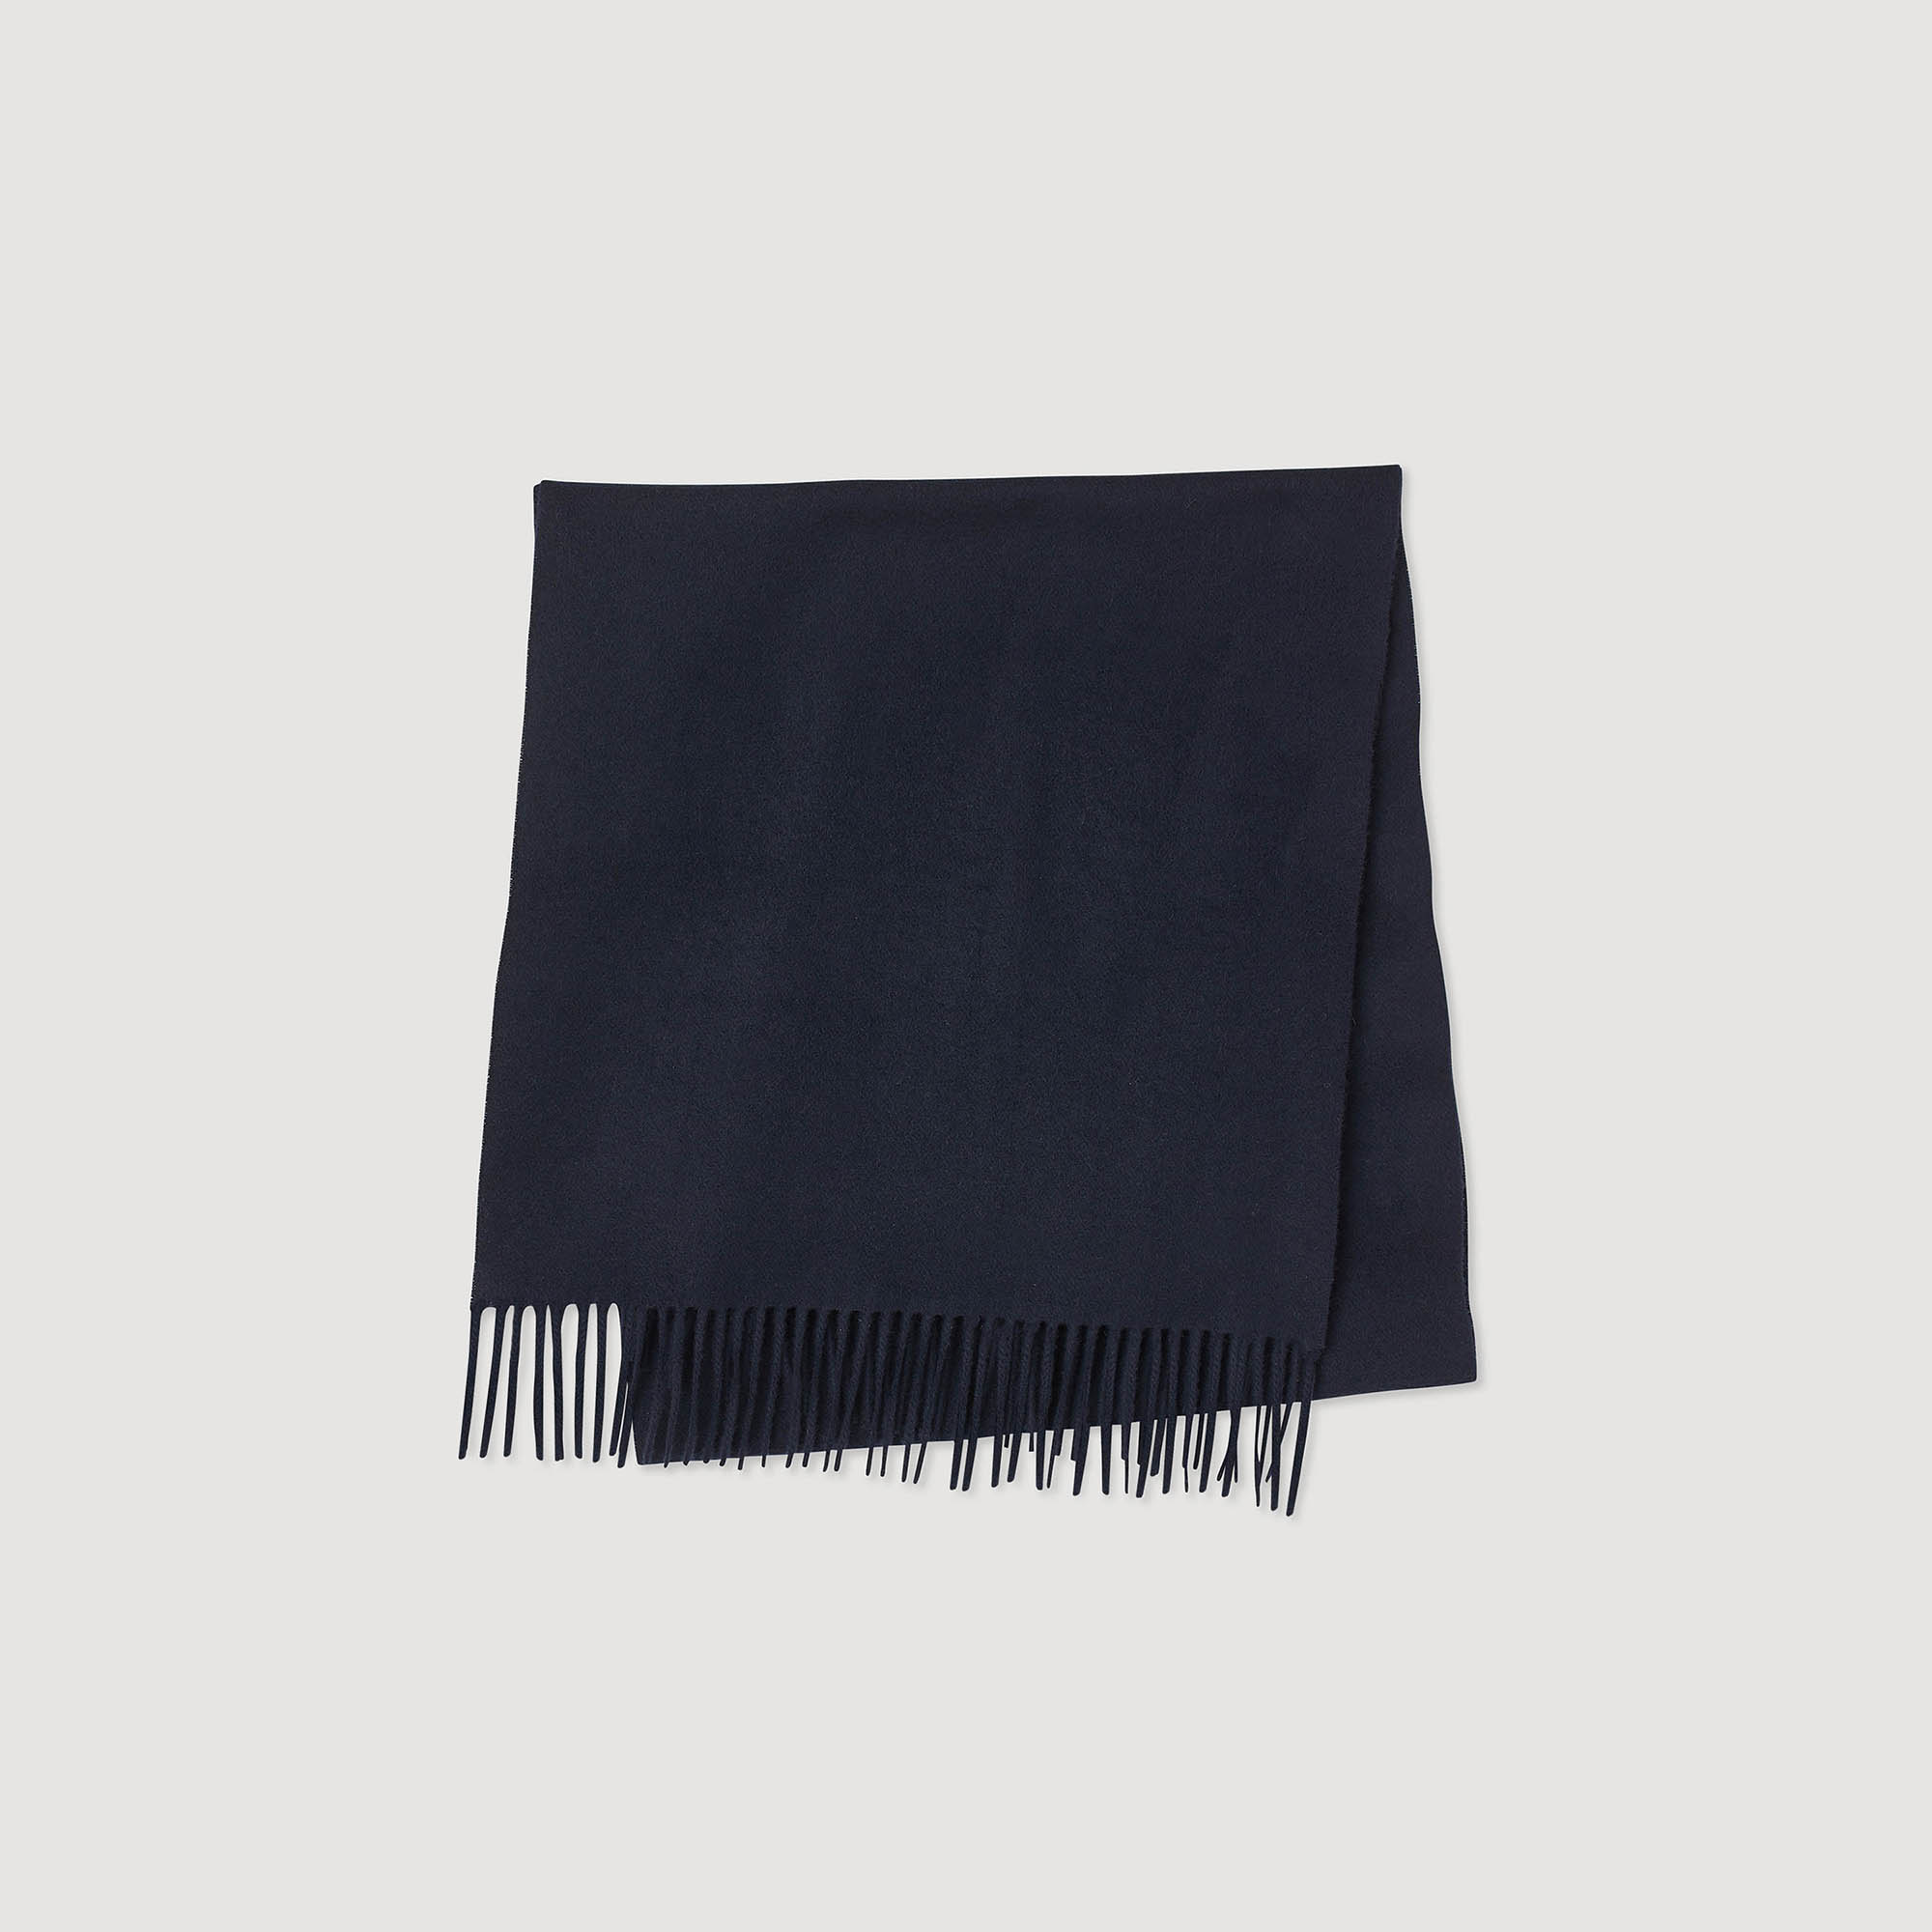 Sandro wool Woven wool and cashmere scarf with rolled fringing and a woven Sandro label